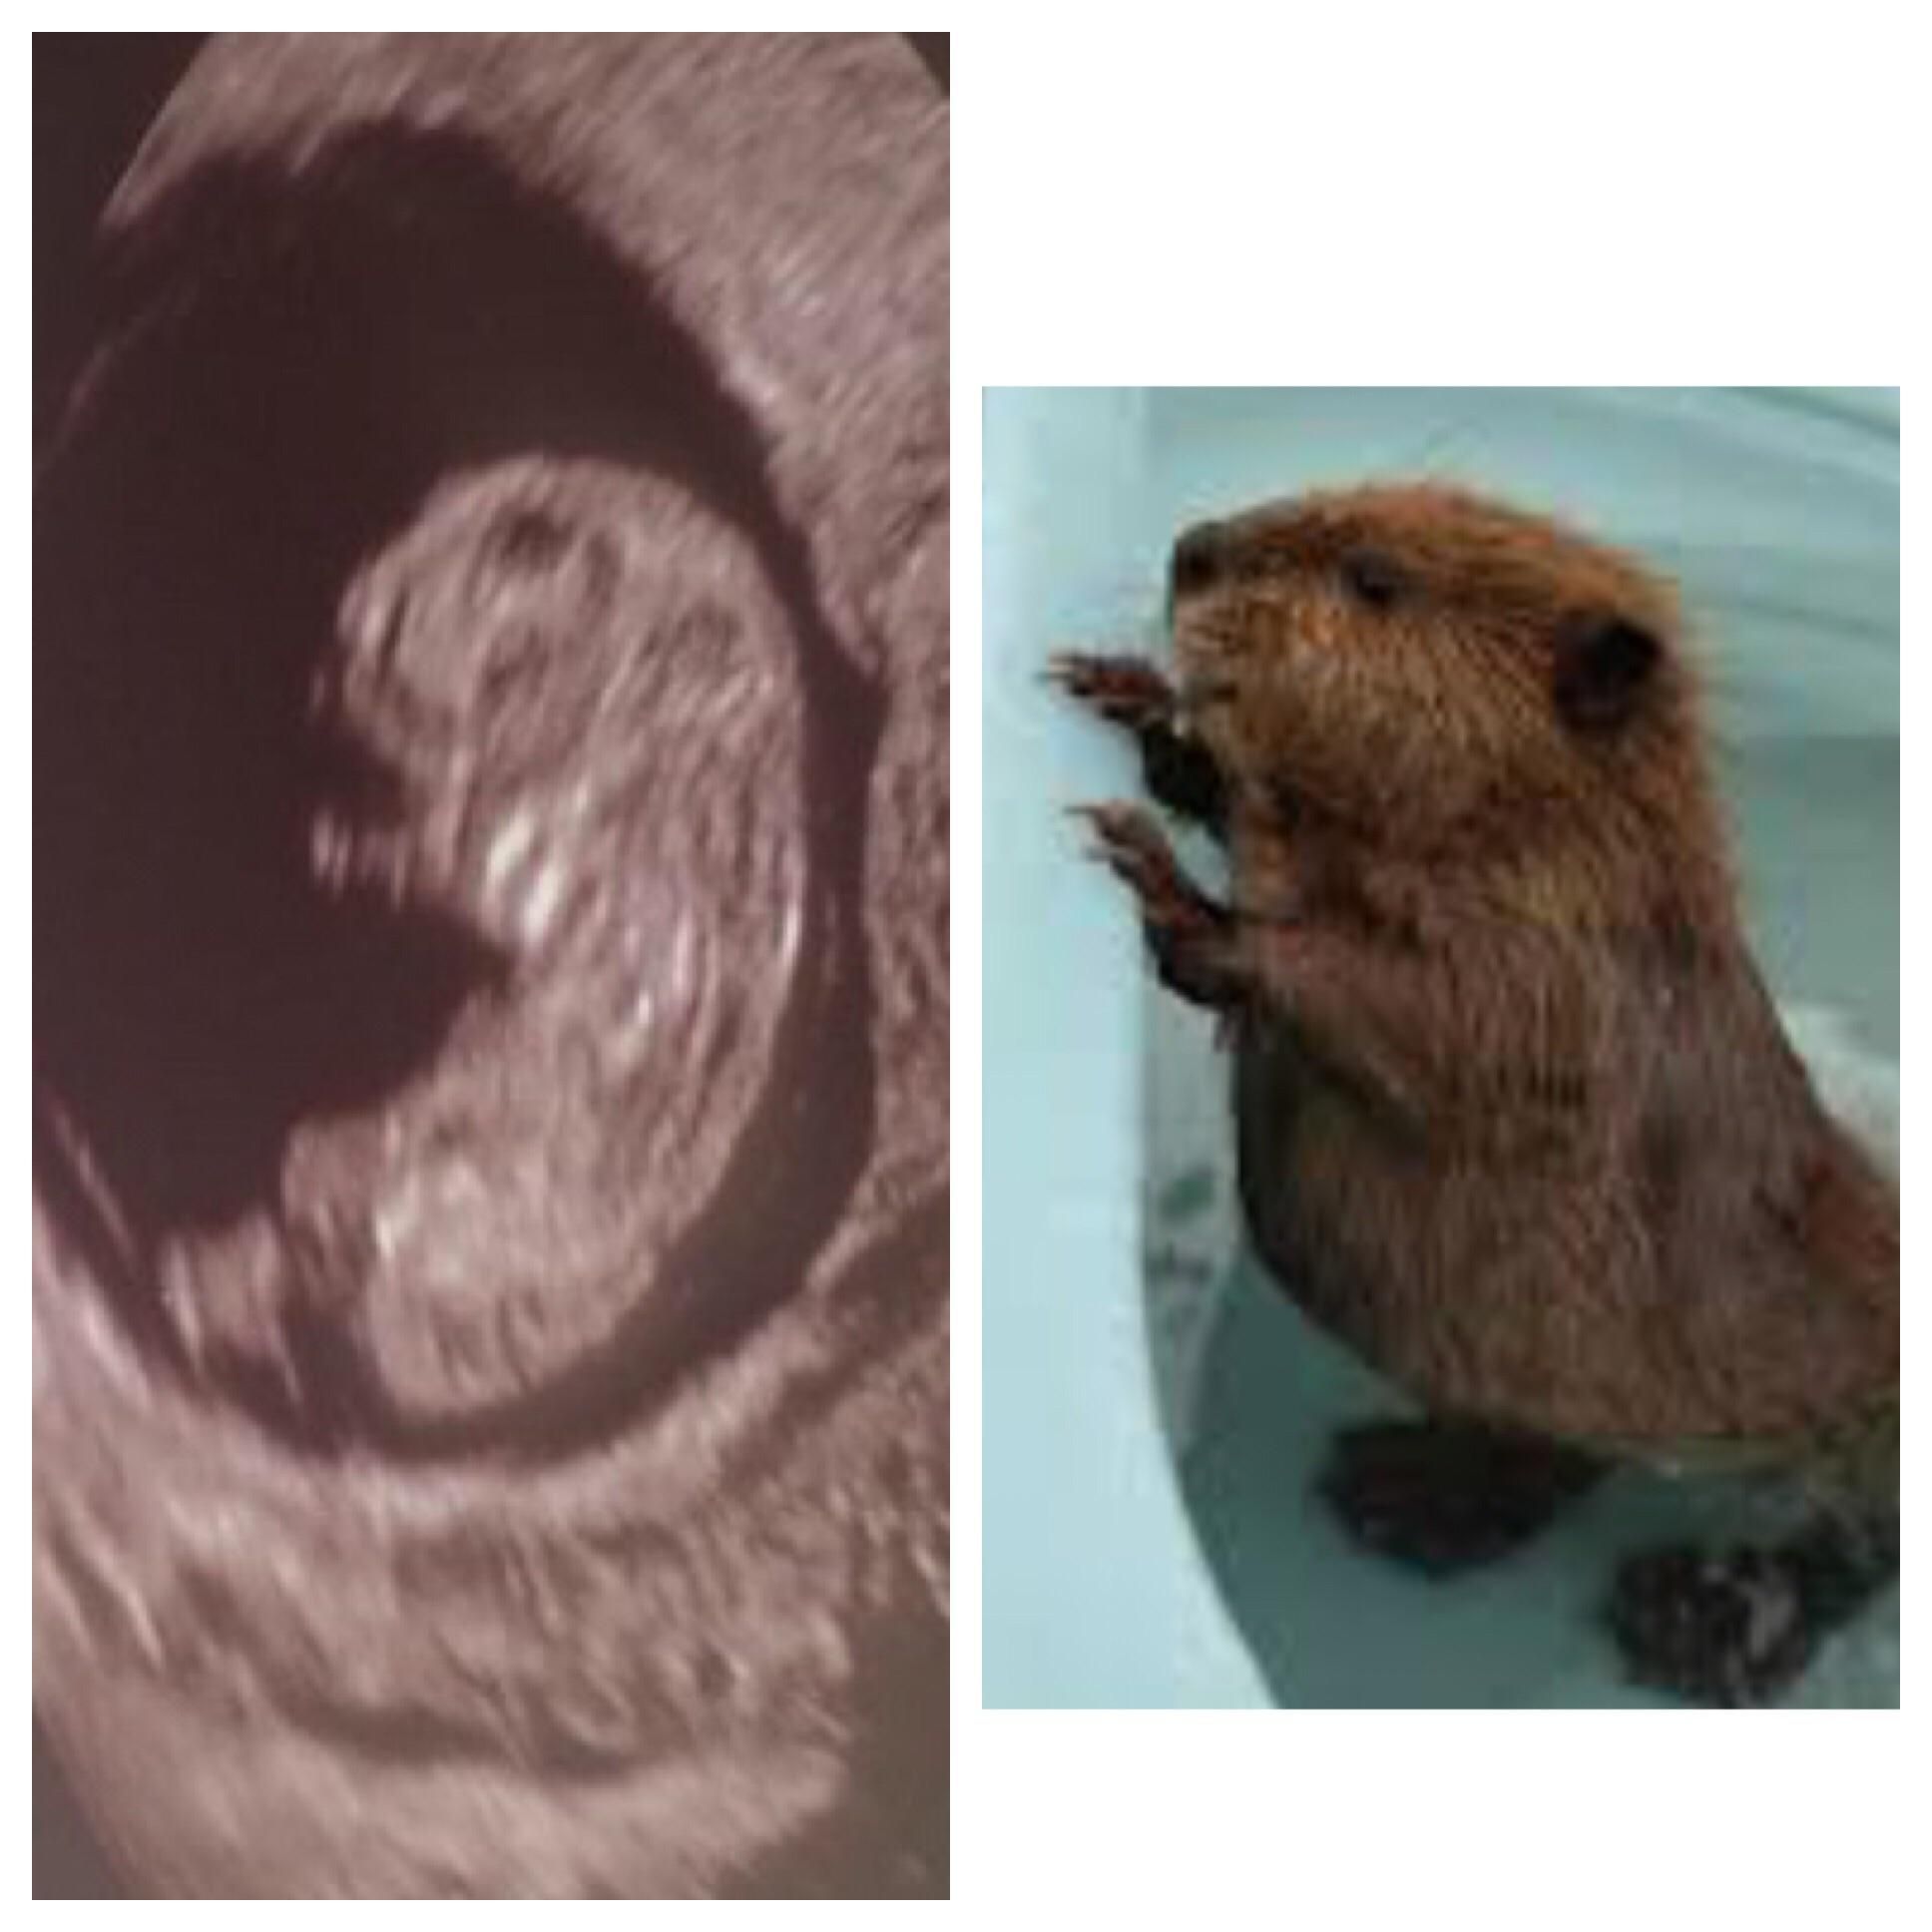 My sister’s baby sonogram reminds me of a beaver